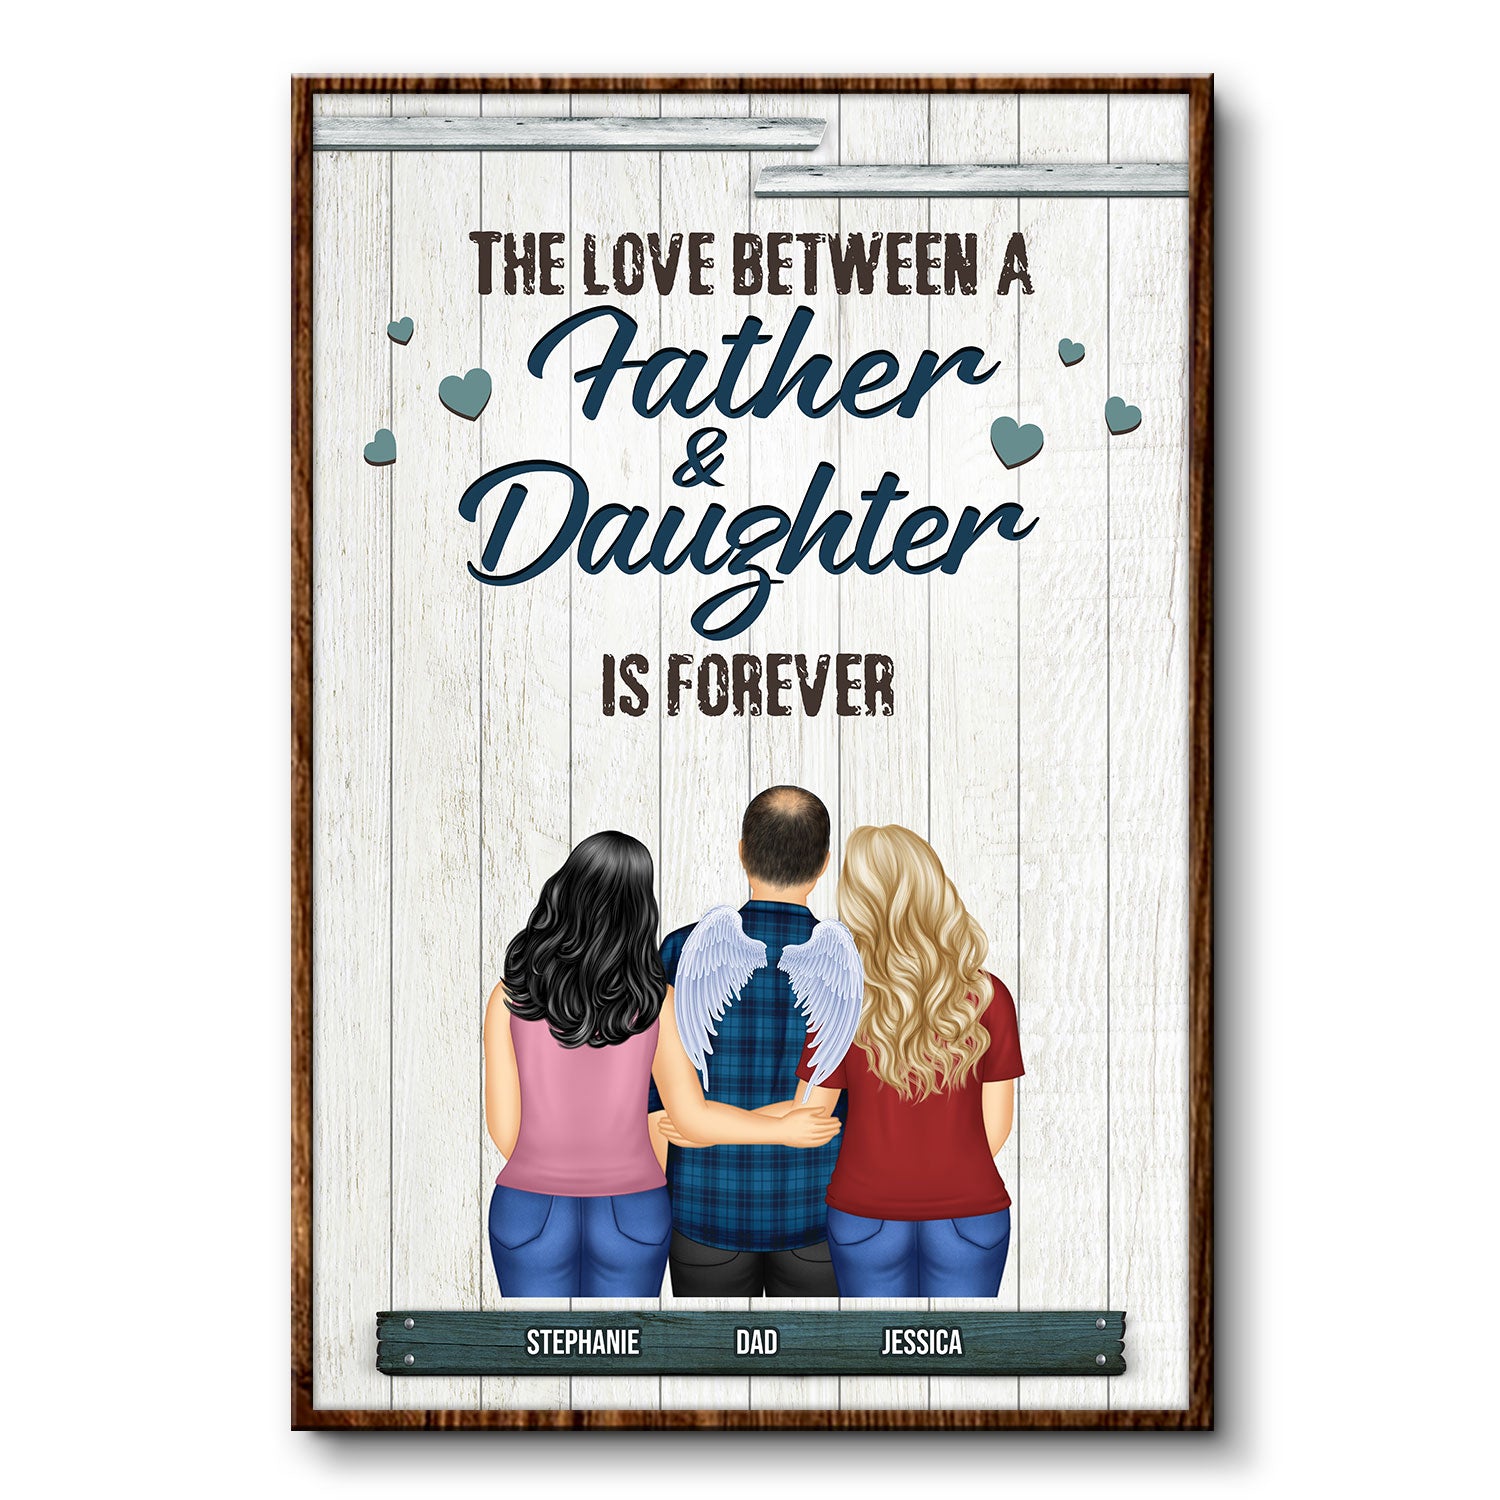 The Love Between Father & Daughter - Gift For Father, Grandpa - Personalized Custom Poster